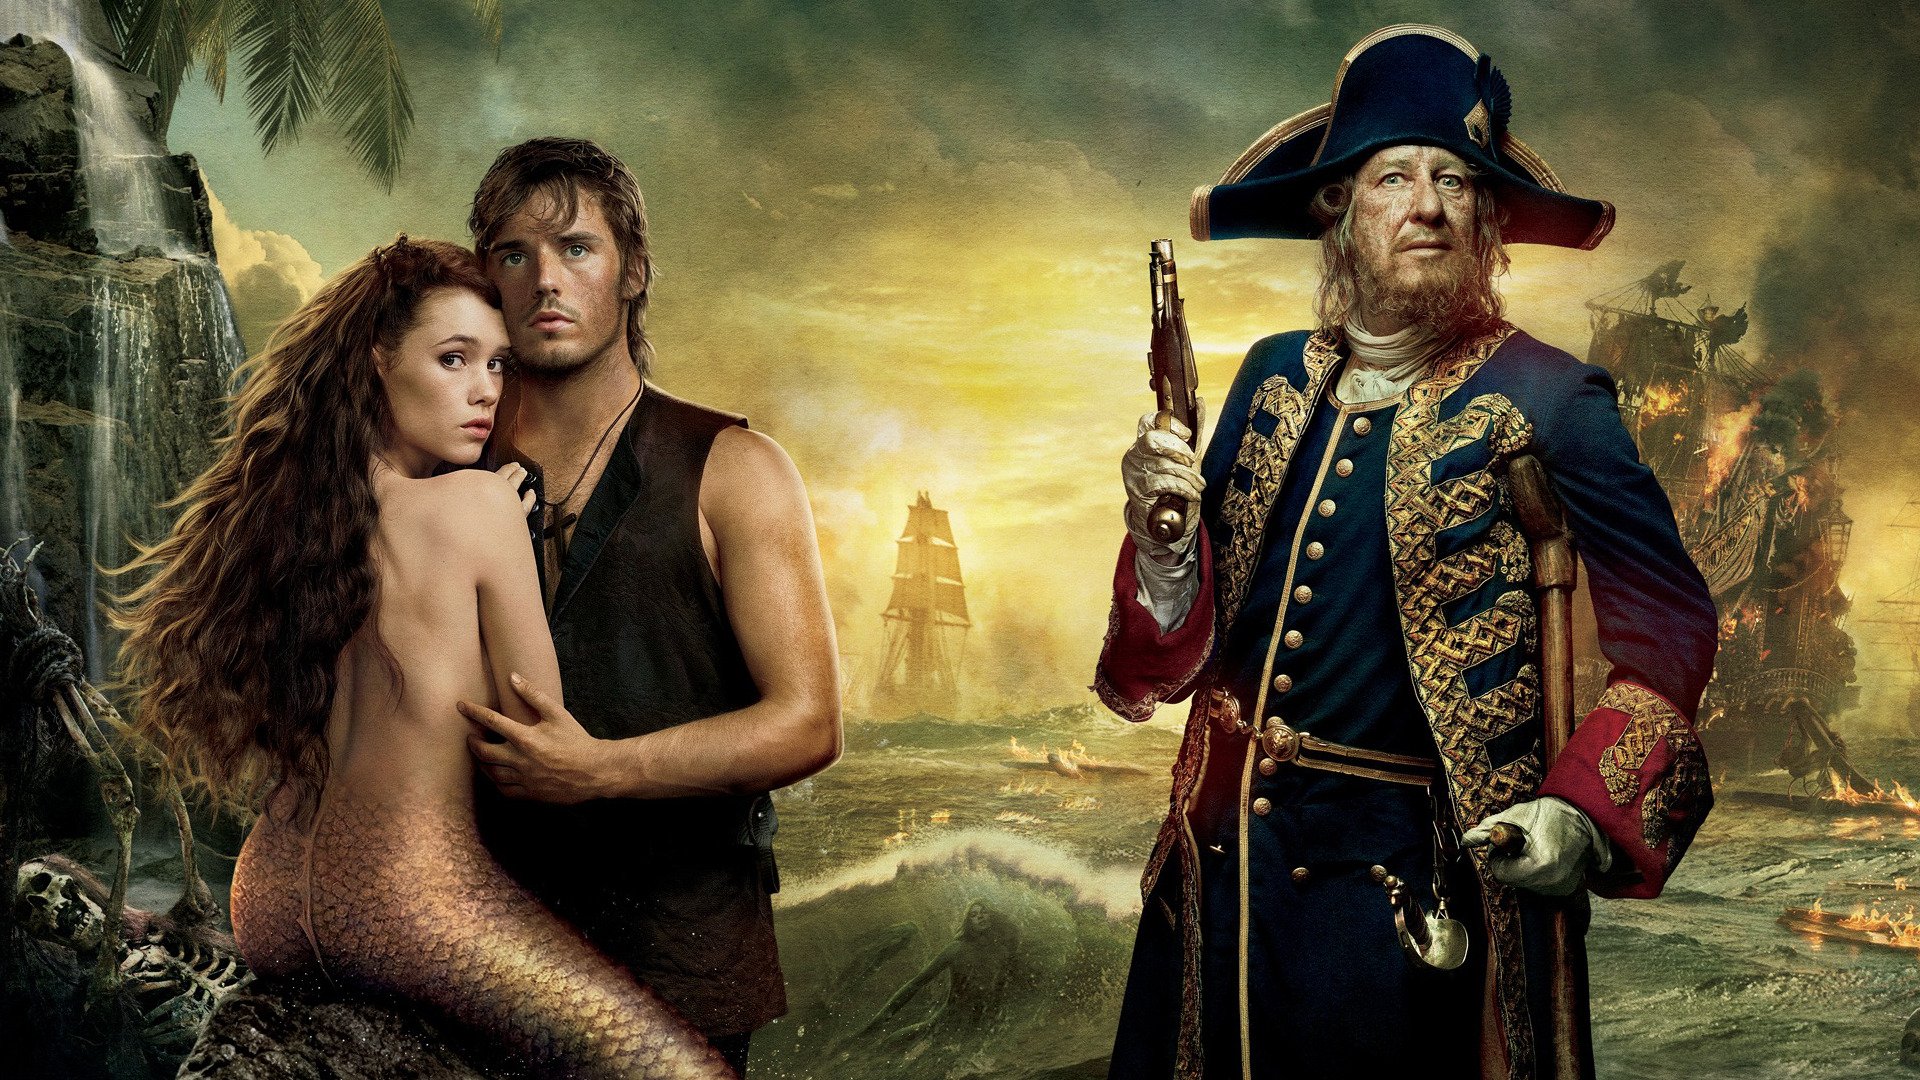 Pirates Of The Caribbean On Stranger Tides Hd Wallpaper Background Image 1920x1080 Id 794101 Wallpaper Abyss